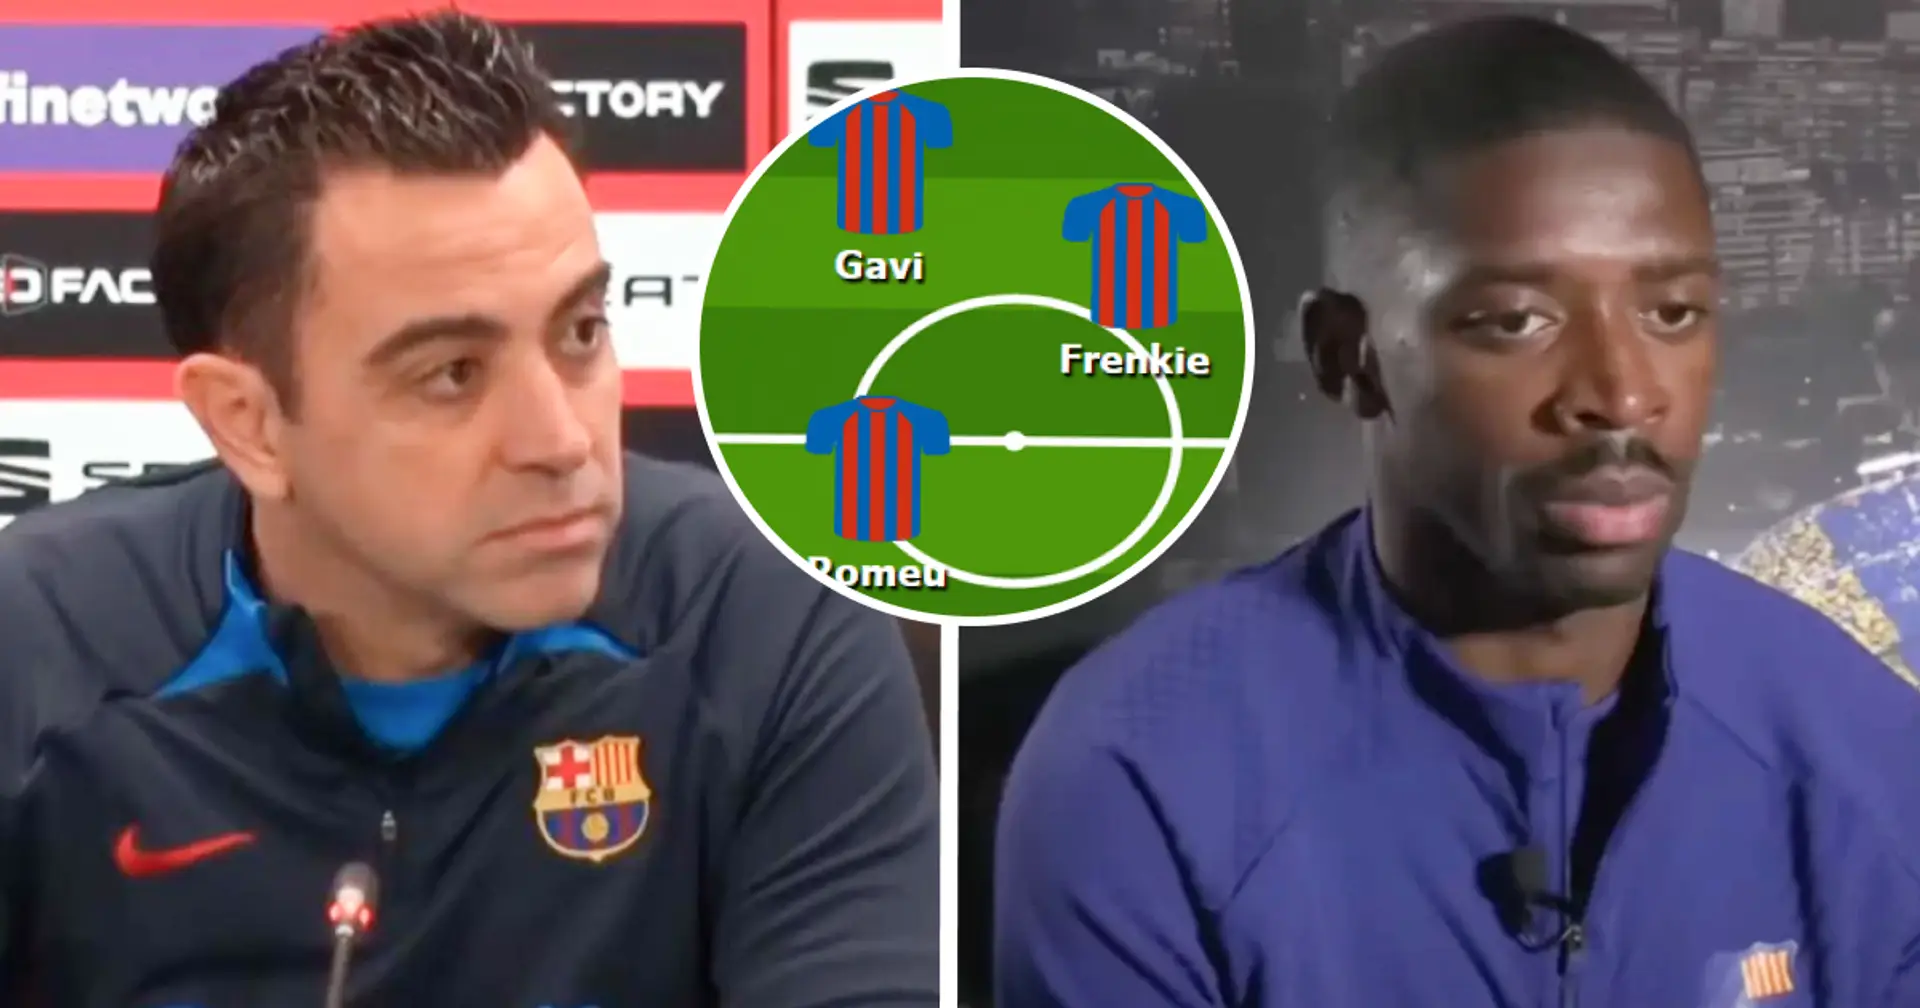 Dembele to be benched: Team news and probable lineups for Barca v AC Milan game